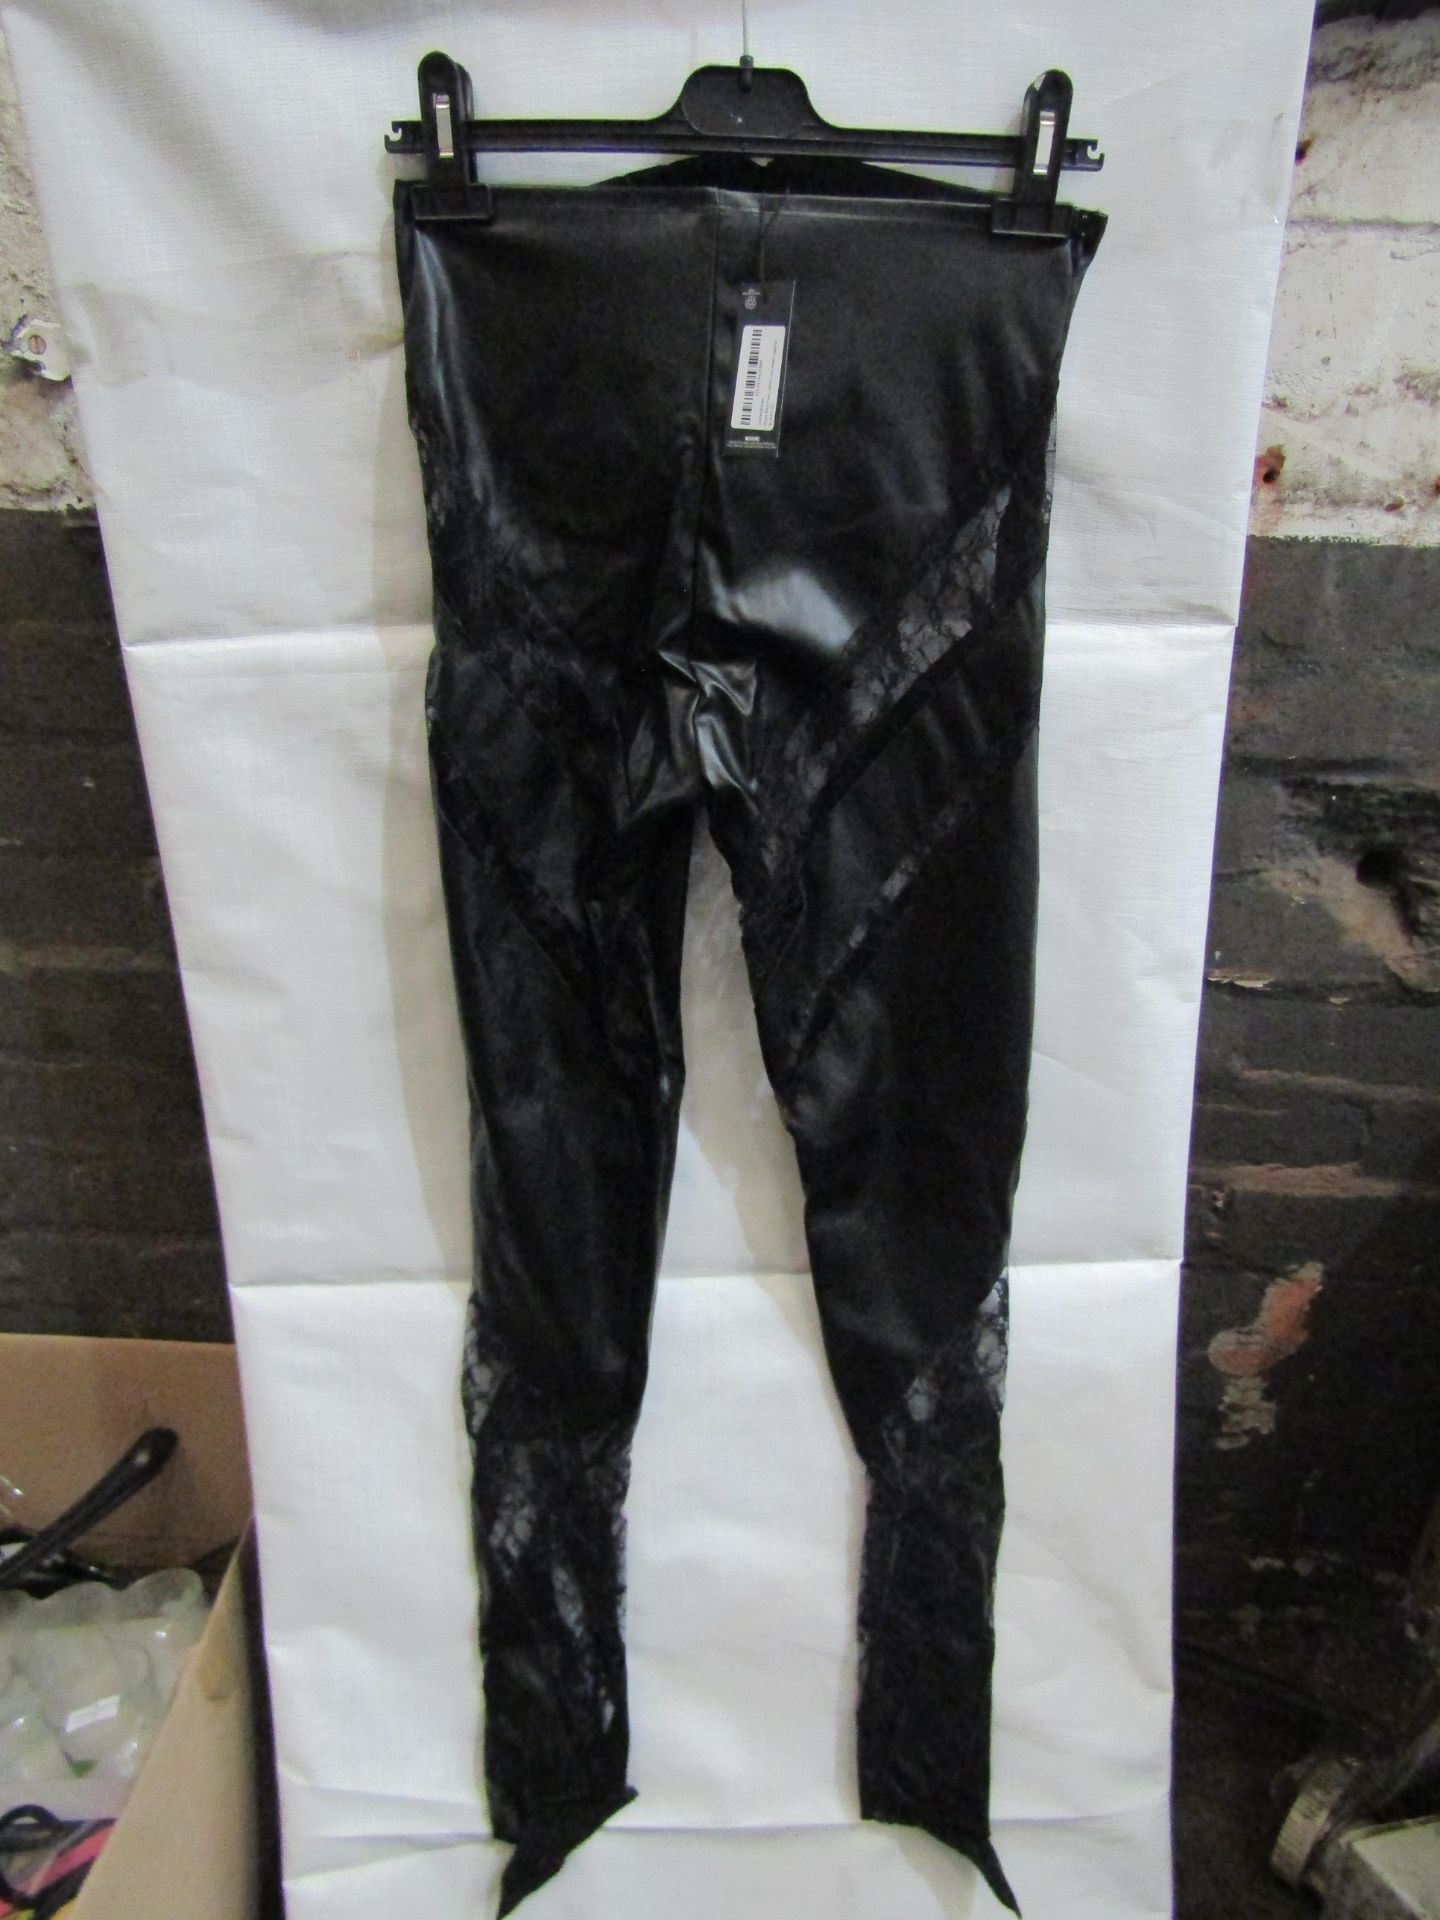 5x PrettyLittleThing Shape Black Faux Leather Insert Leggings, Size: 6 - New & Packaged.